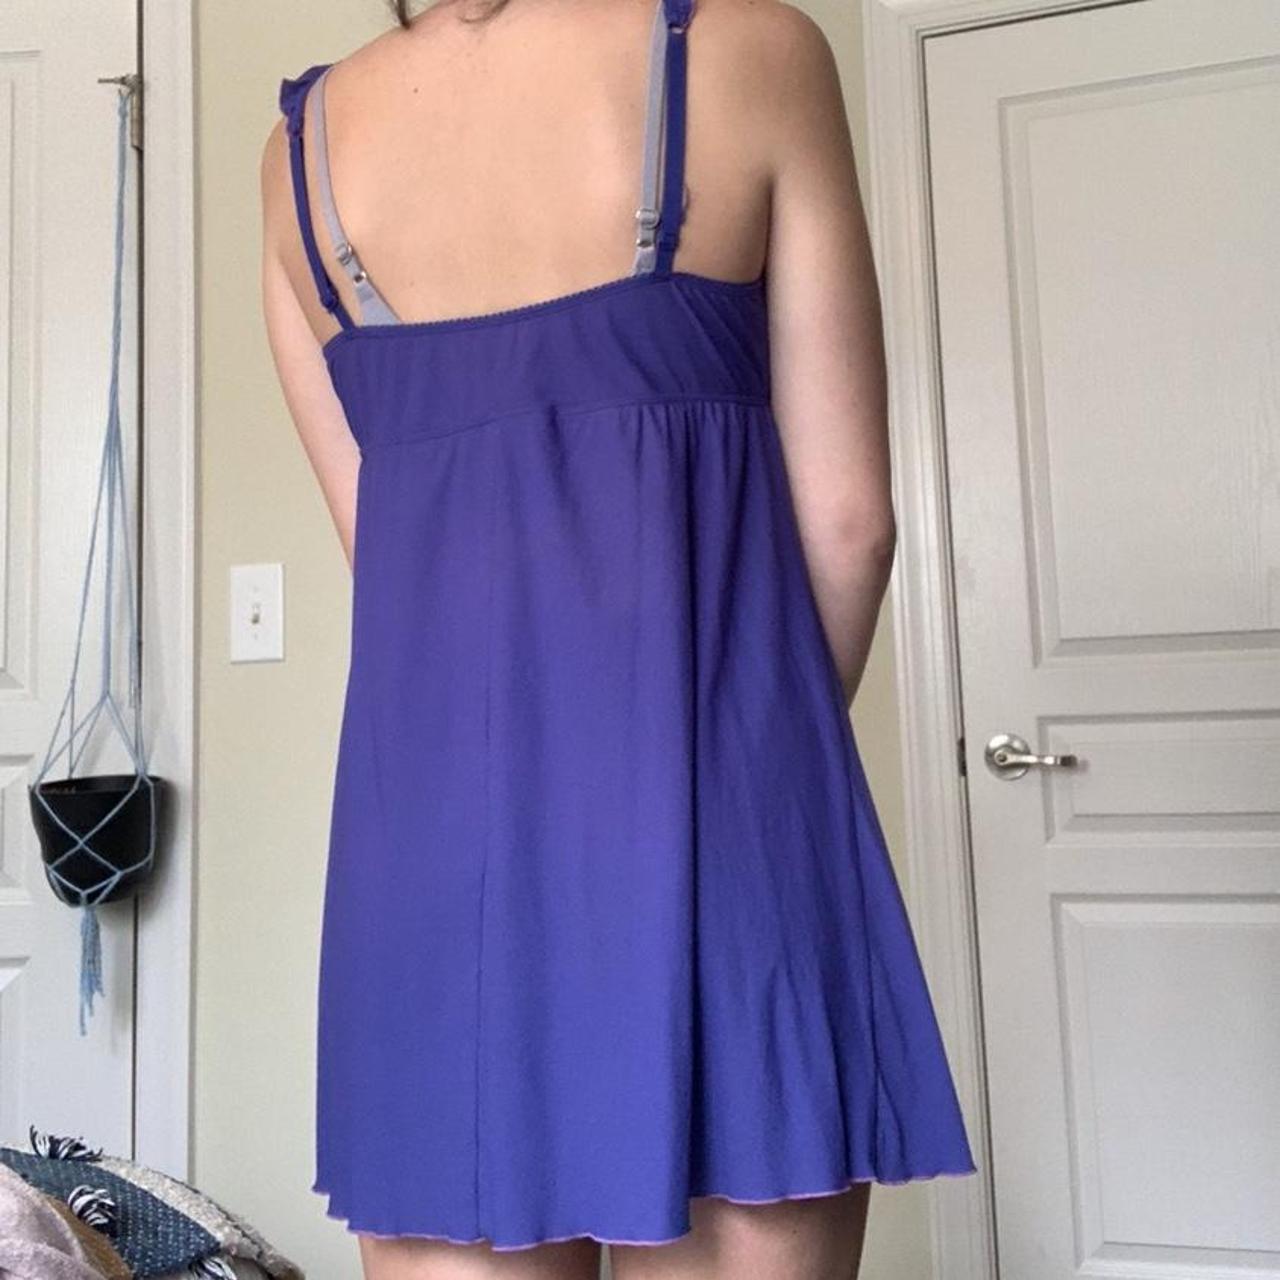 Smart and Sexy Women's Purple and Pink Dress (3)